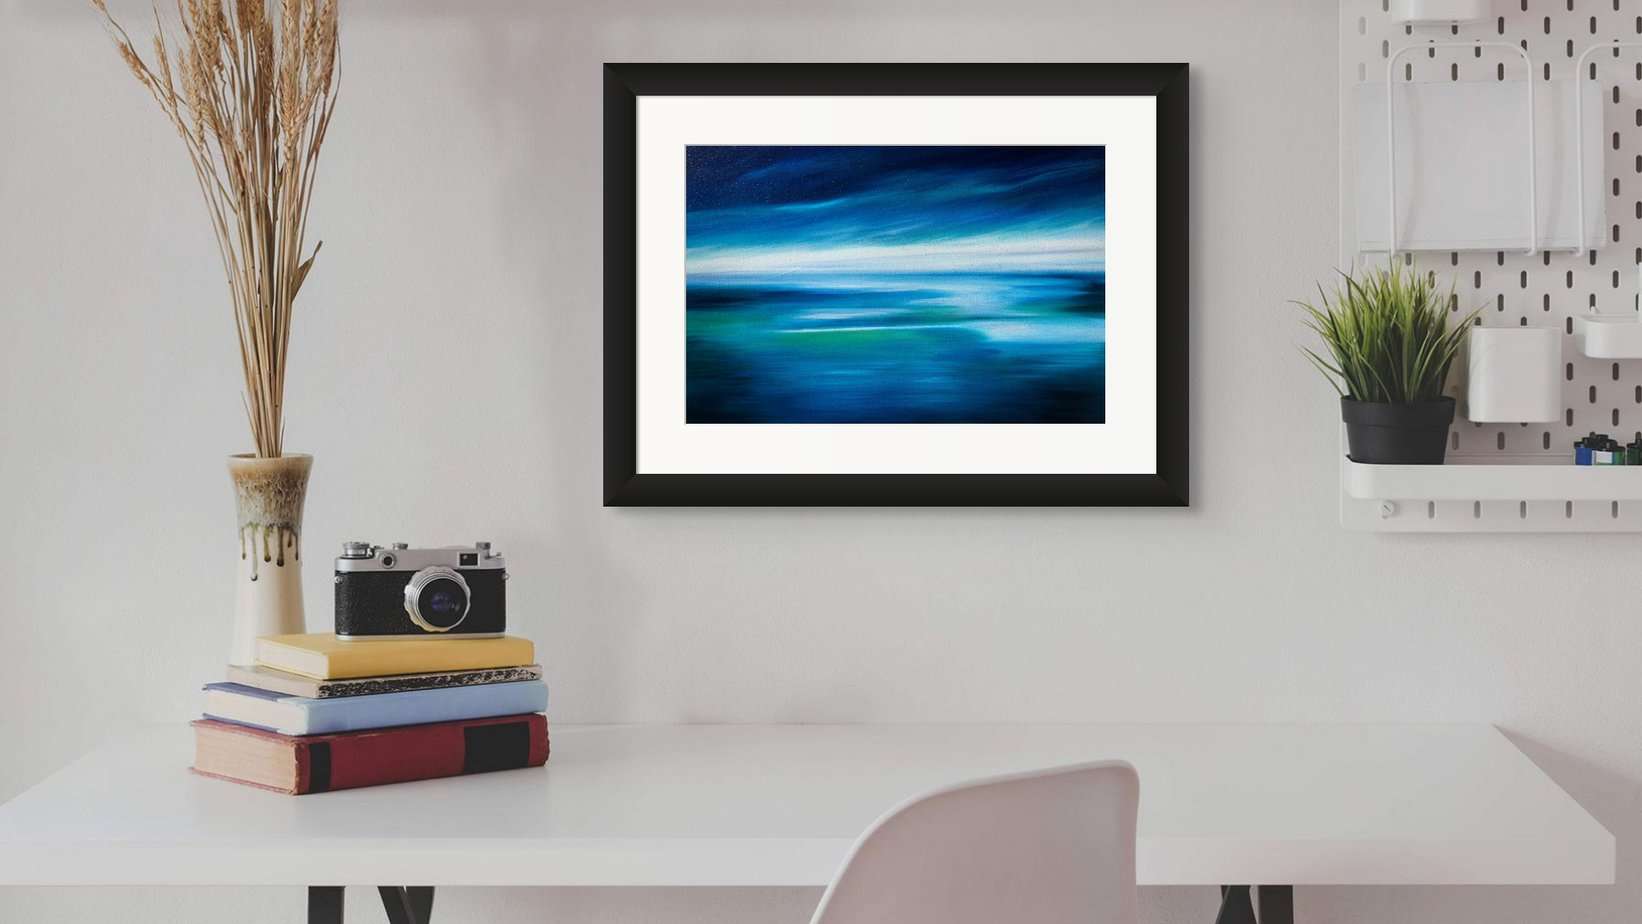 Abstract Calm Seascape in a room setting with a black frame